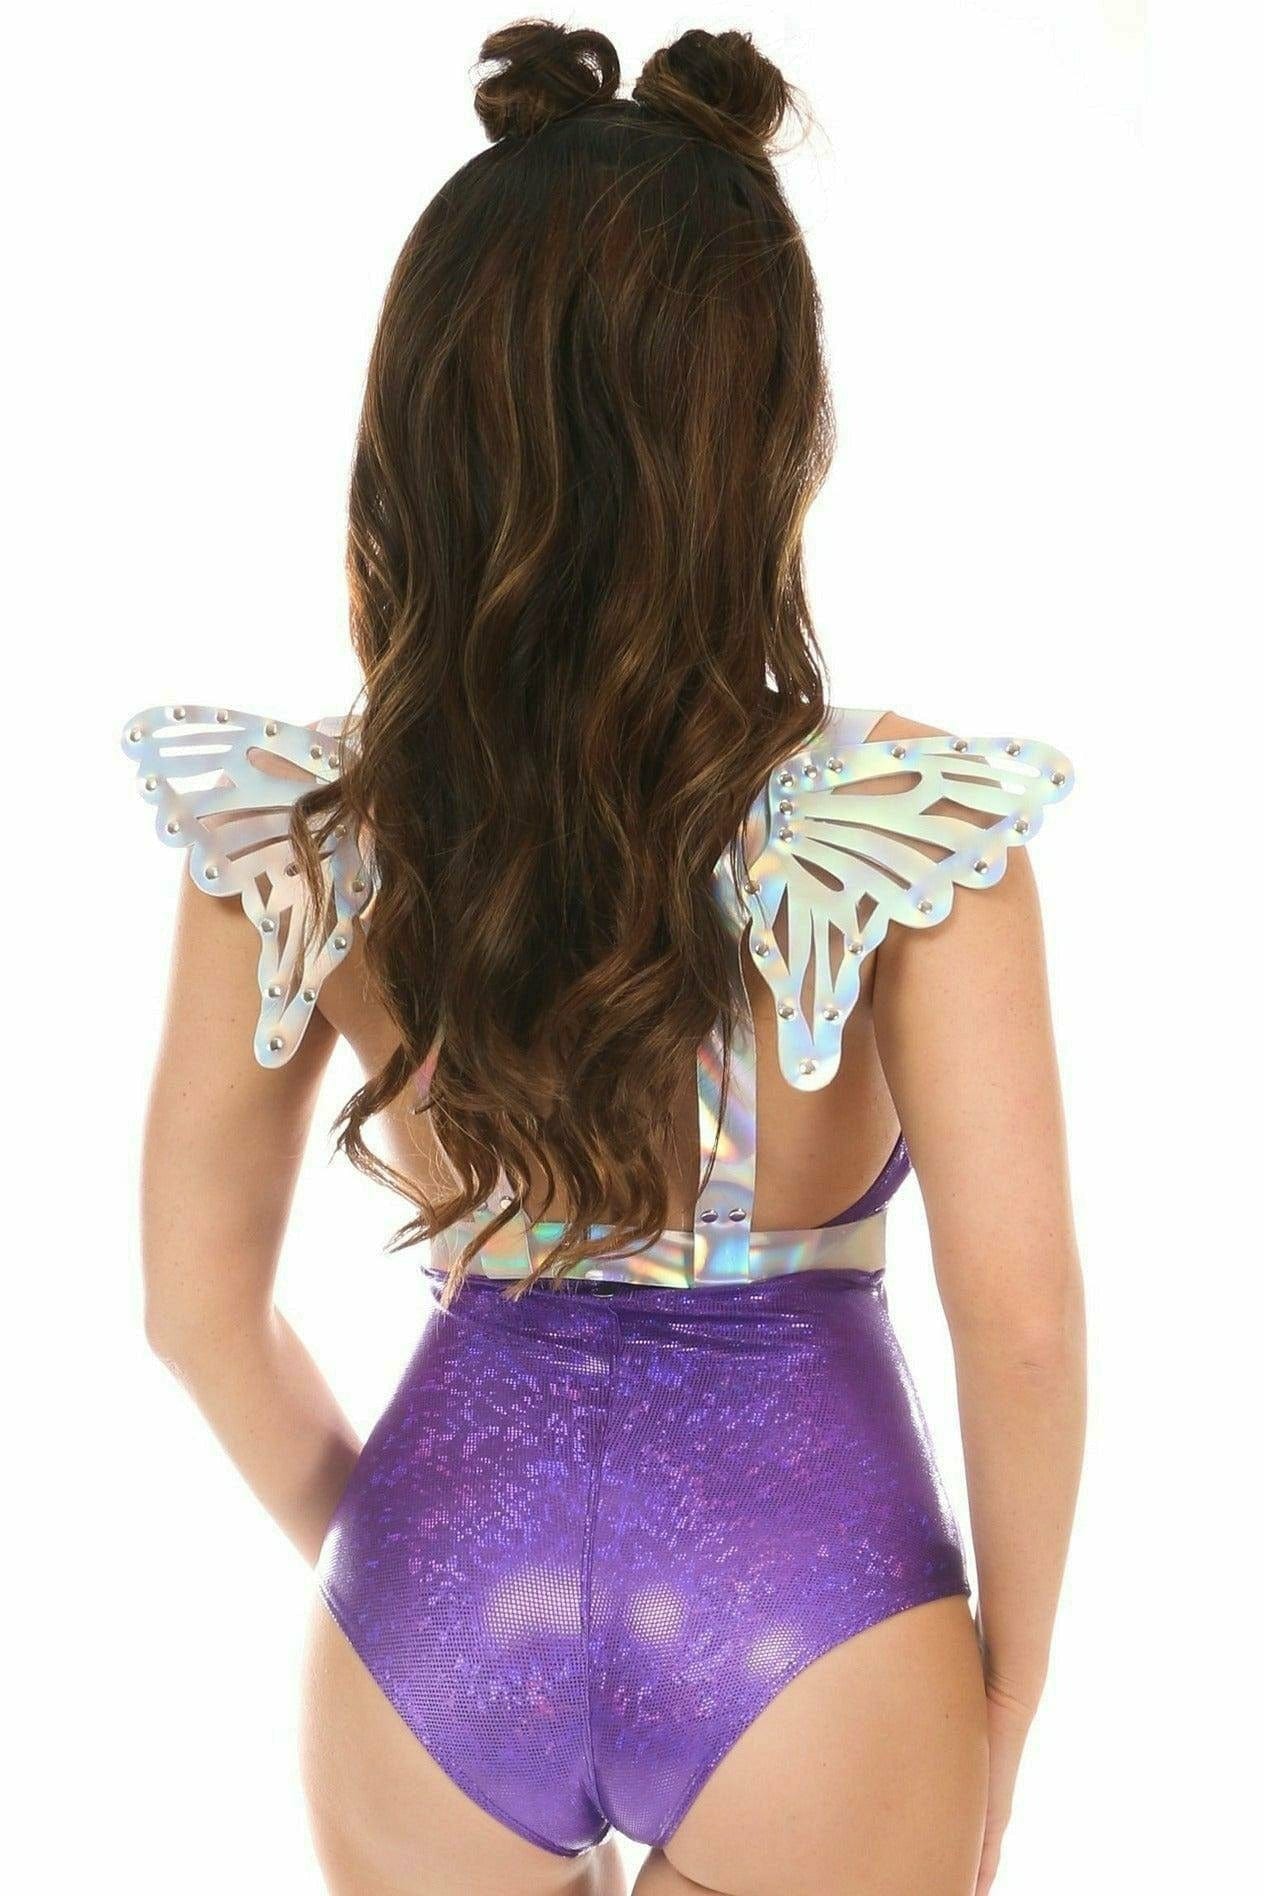 Silver Hologram Body Harness with Wings - Small Musotica.com